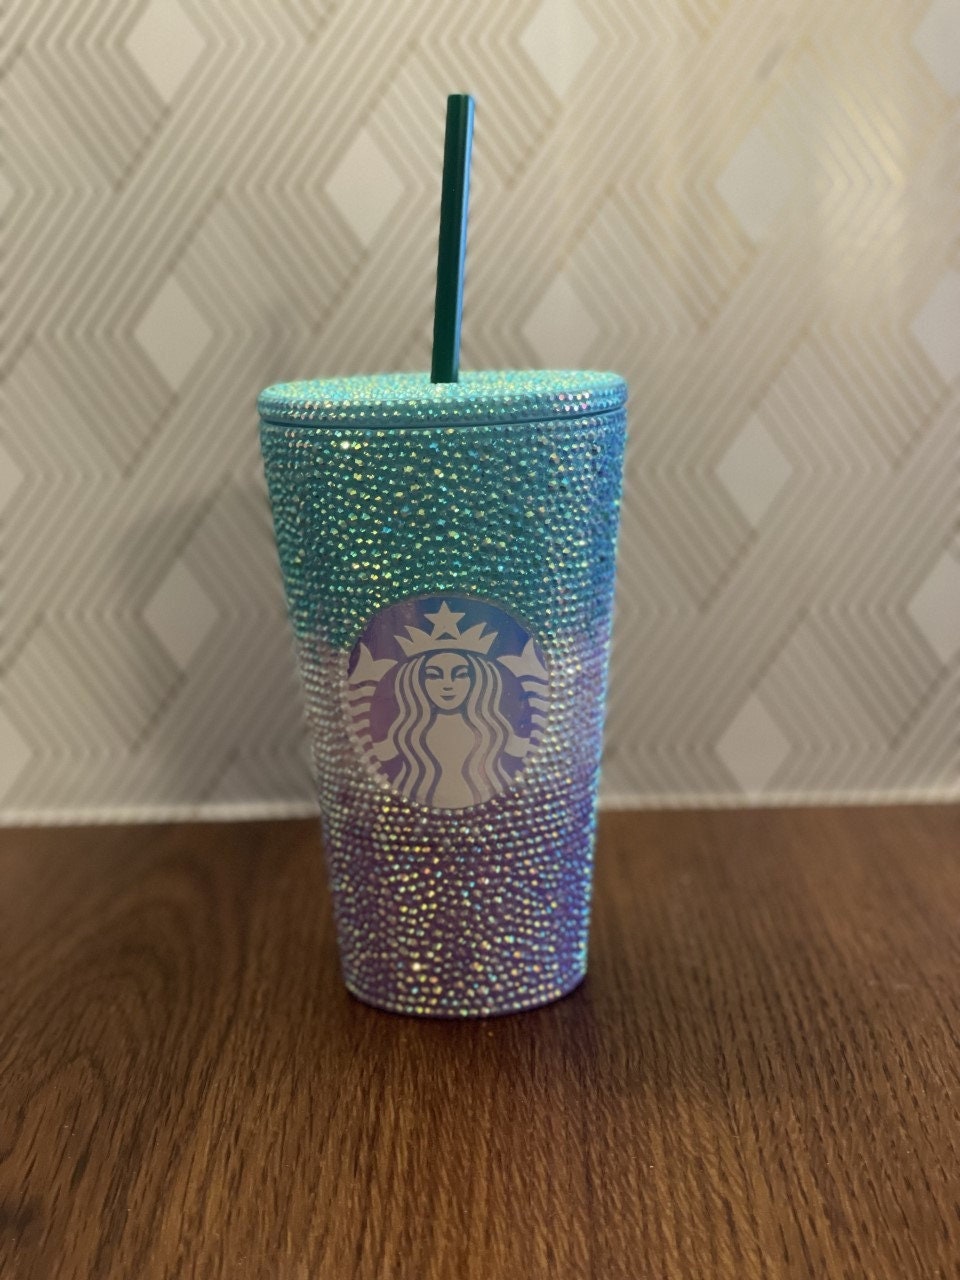 Chanel Inspired Starbucks Cold Cup